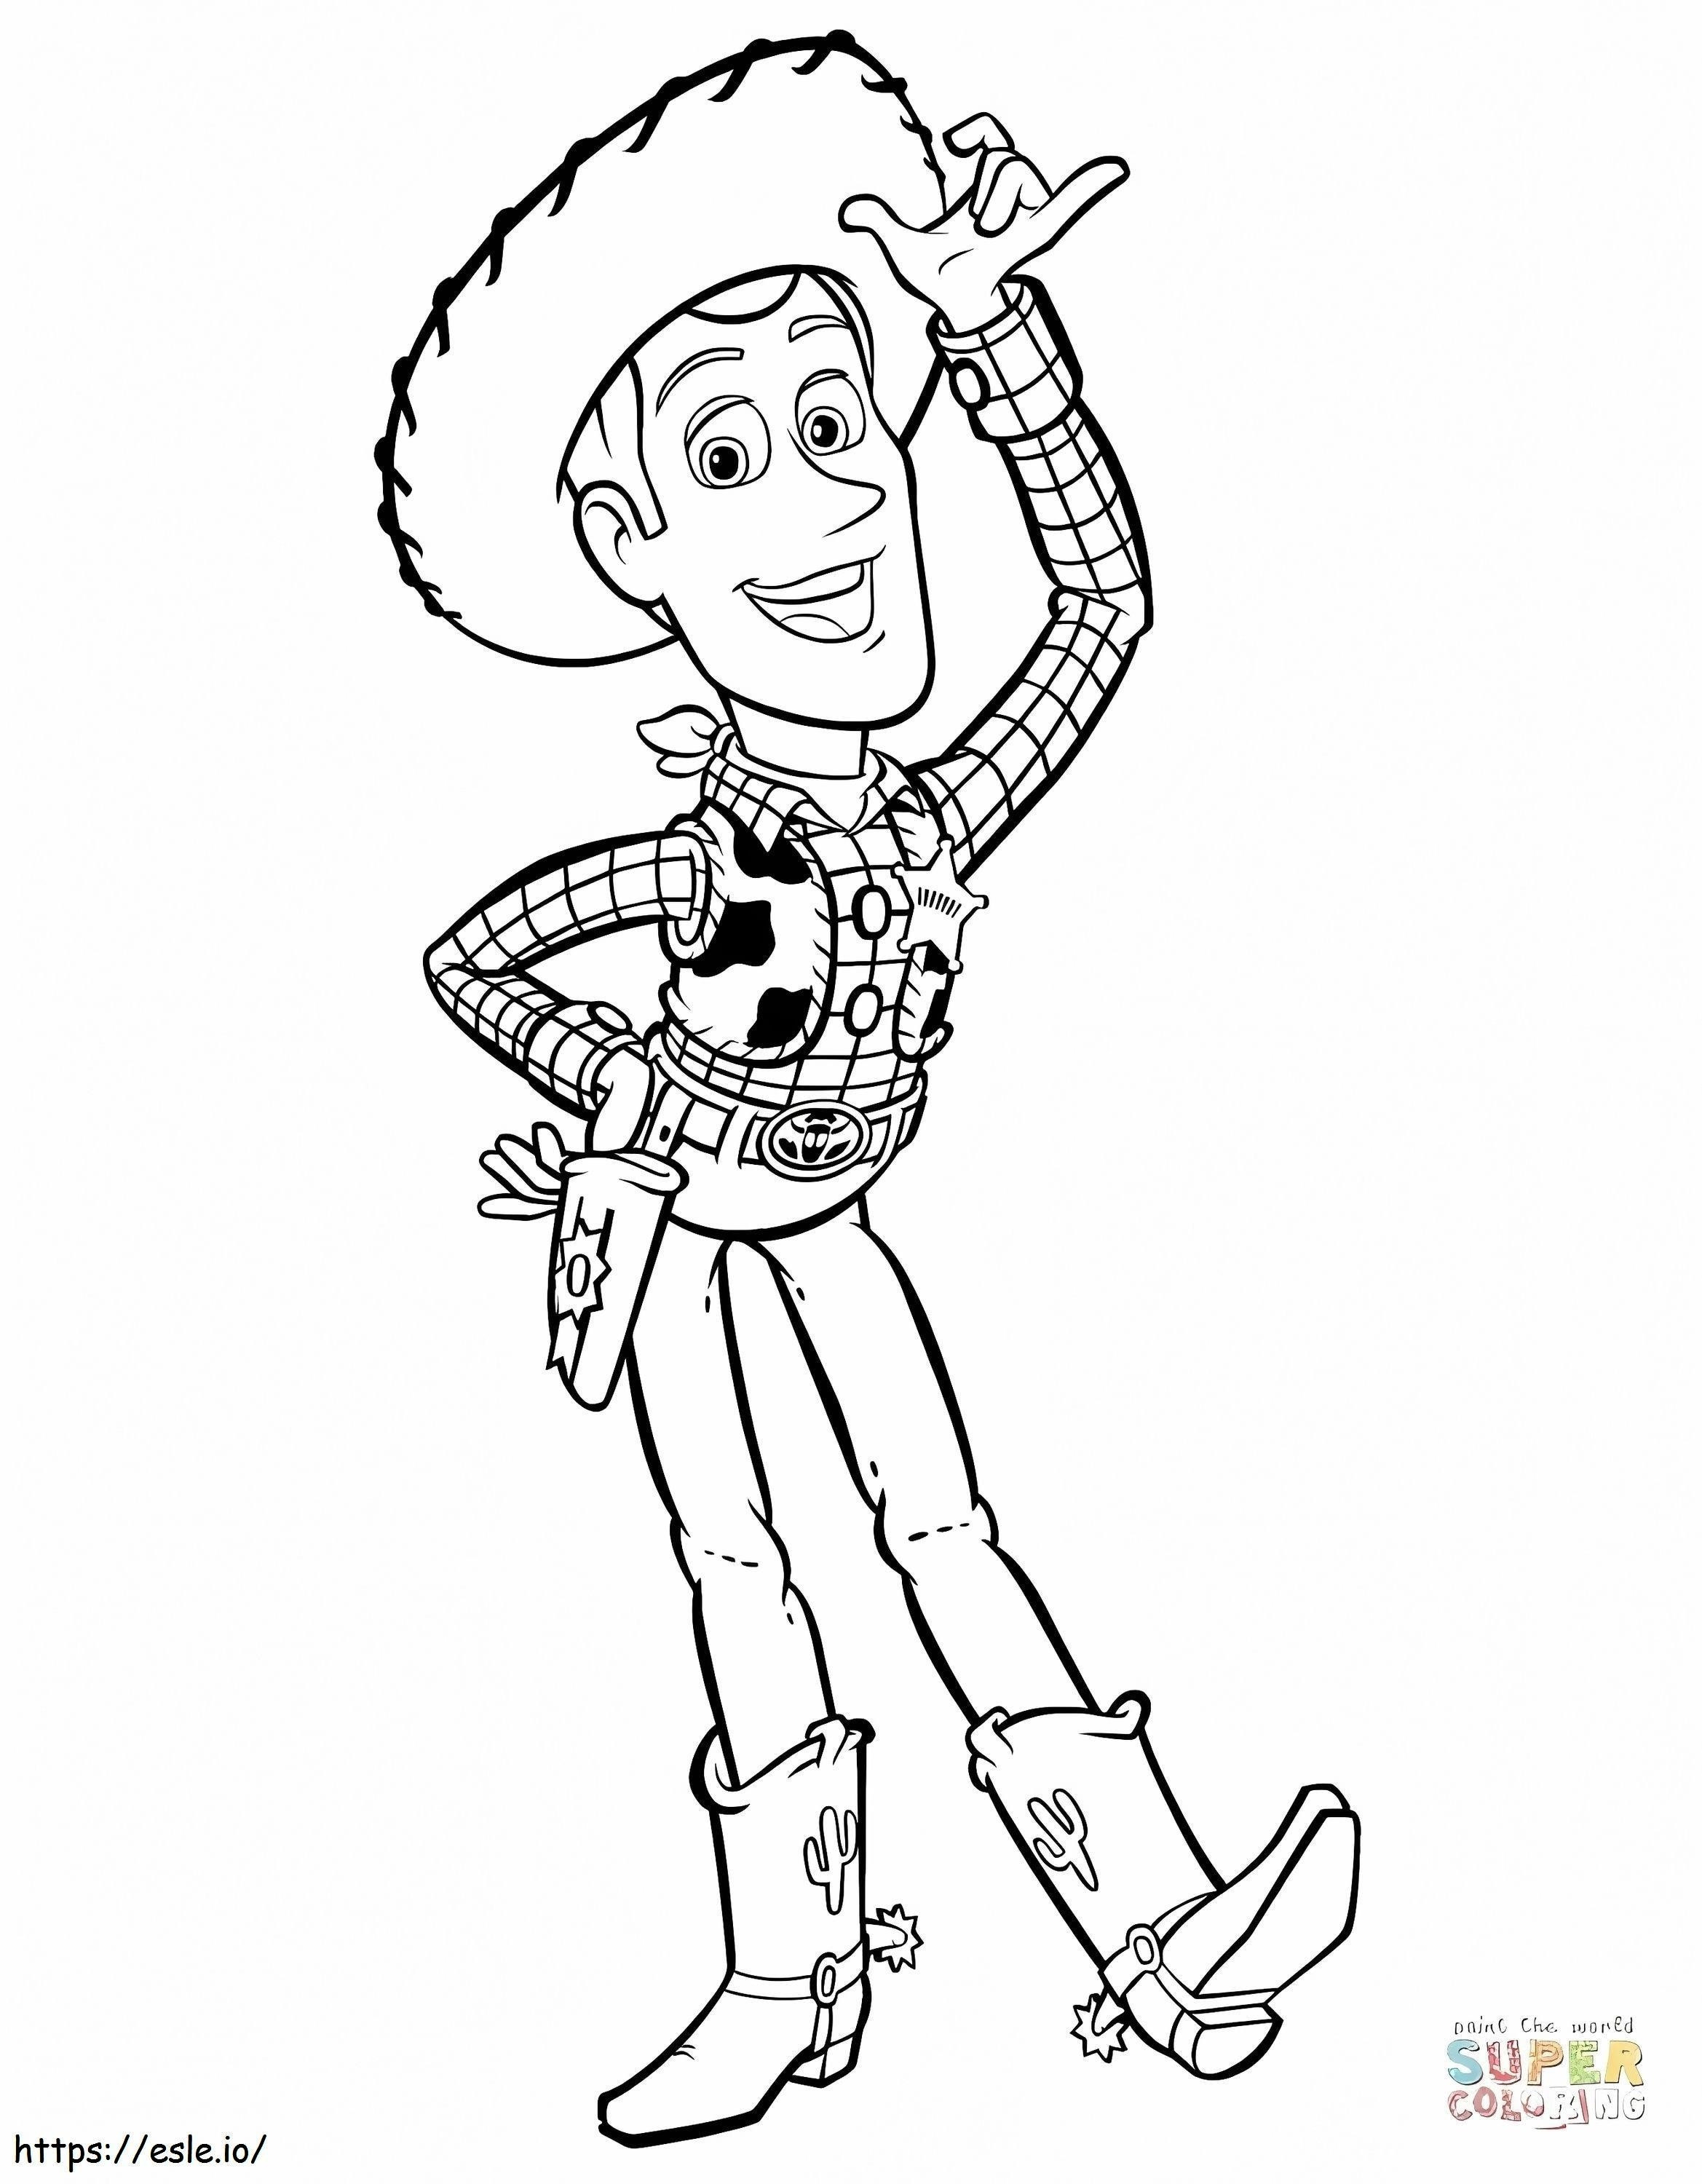 1559876072_Happy Woody A4 coloring page